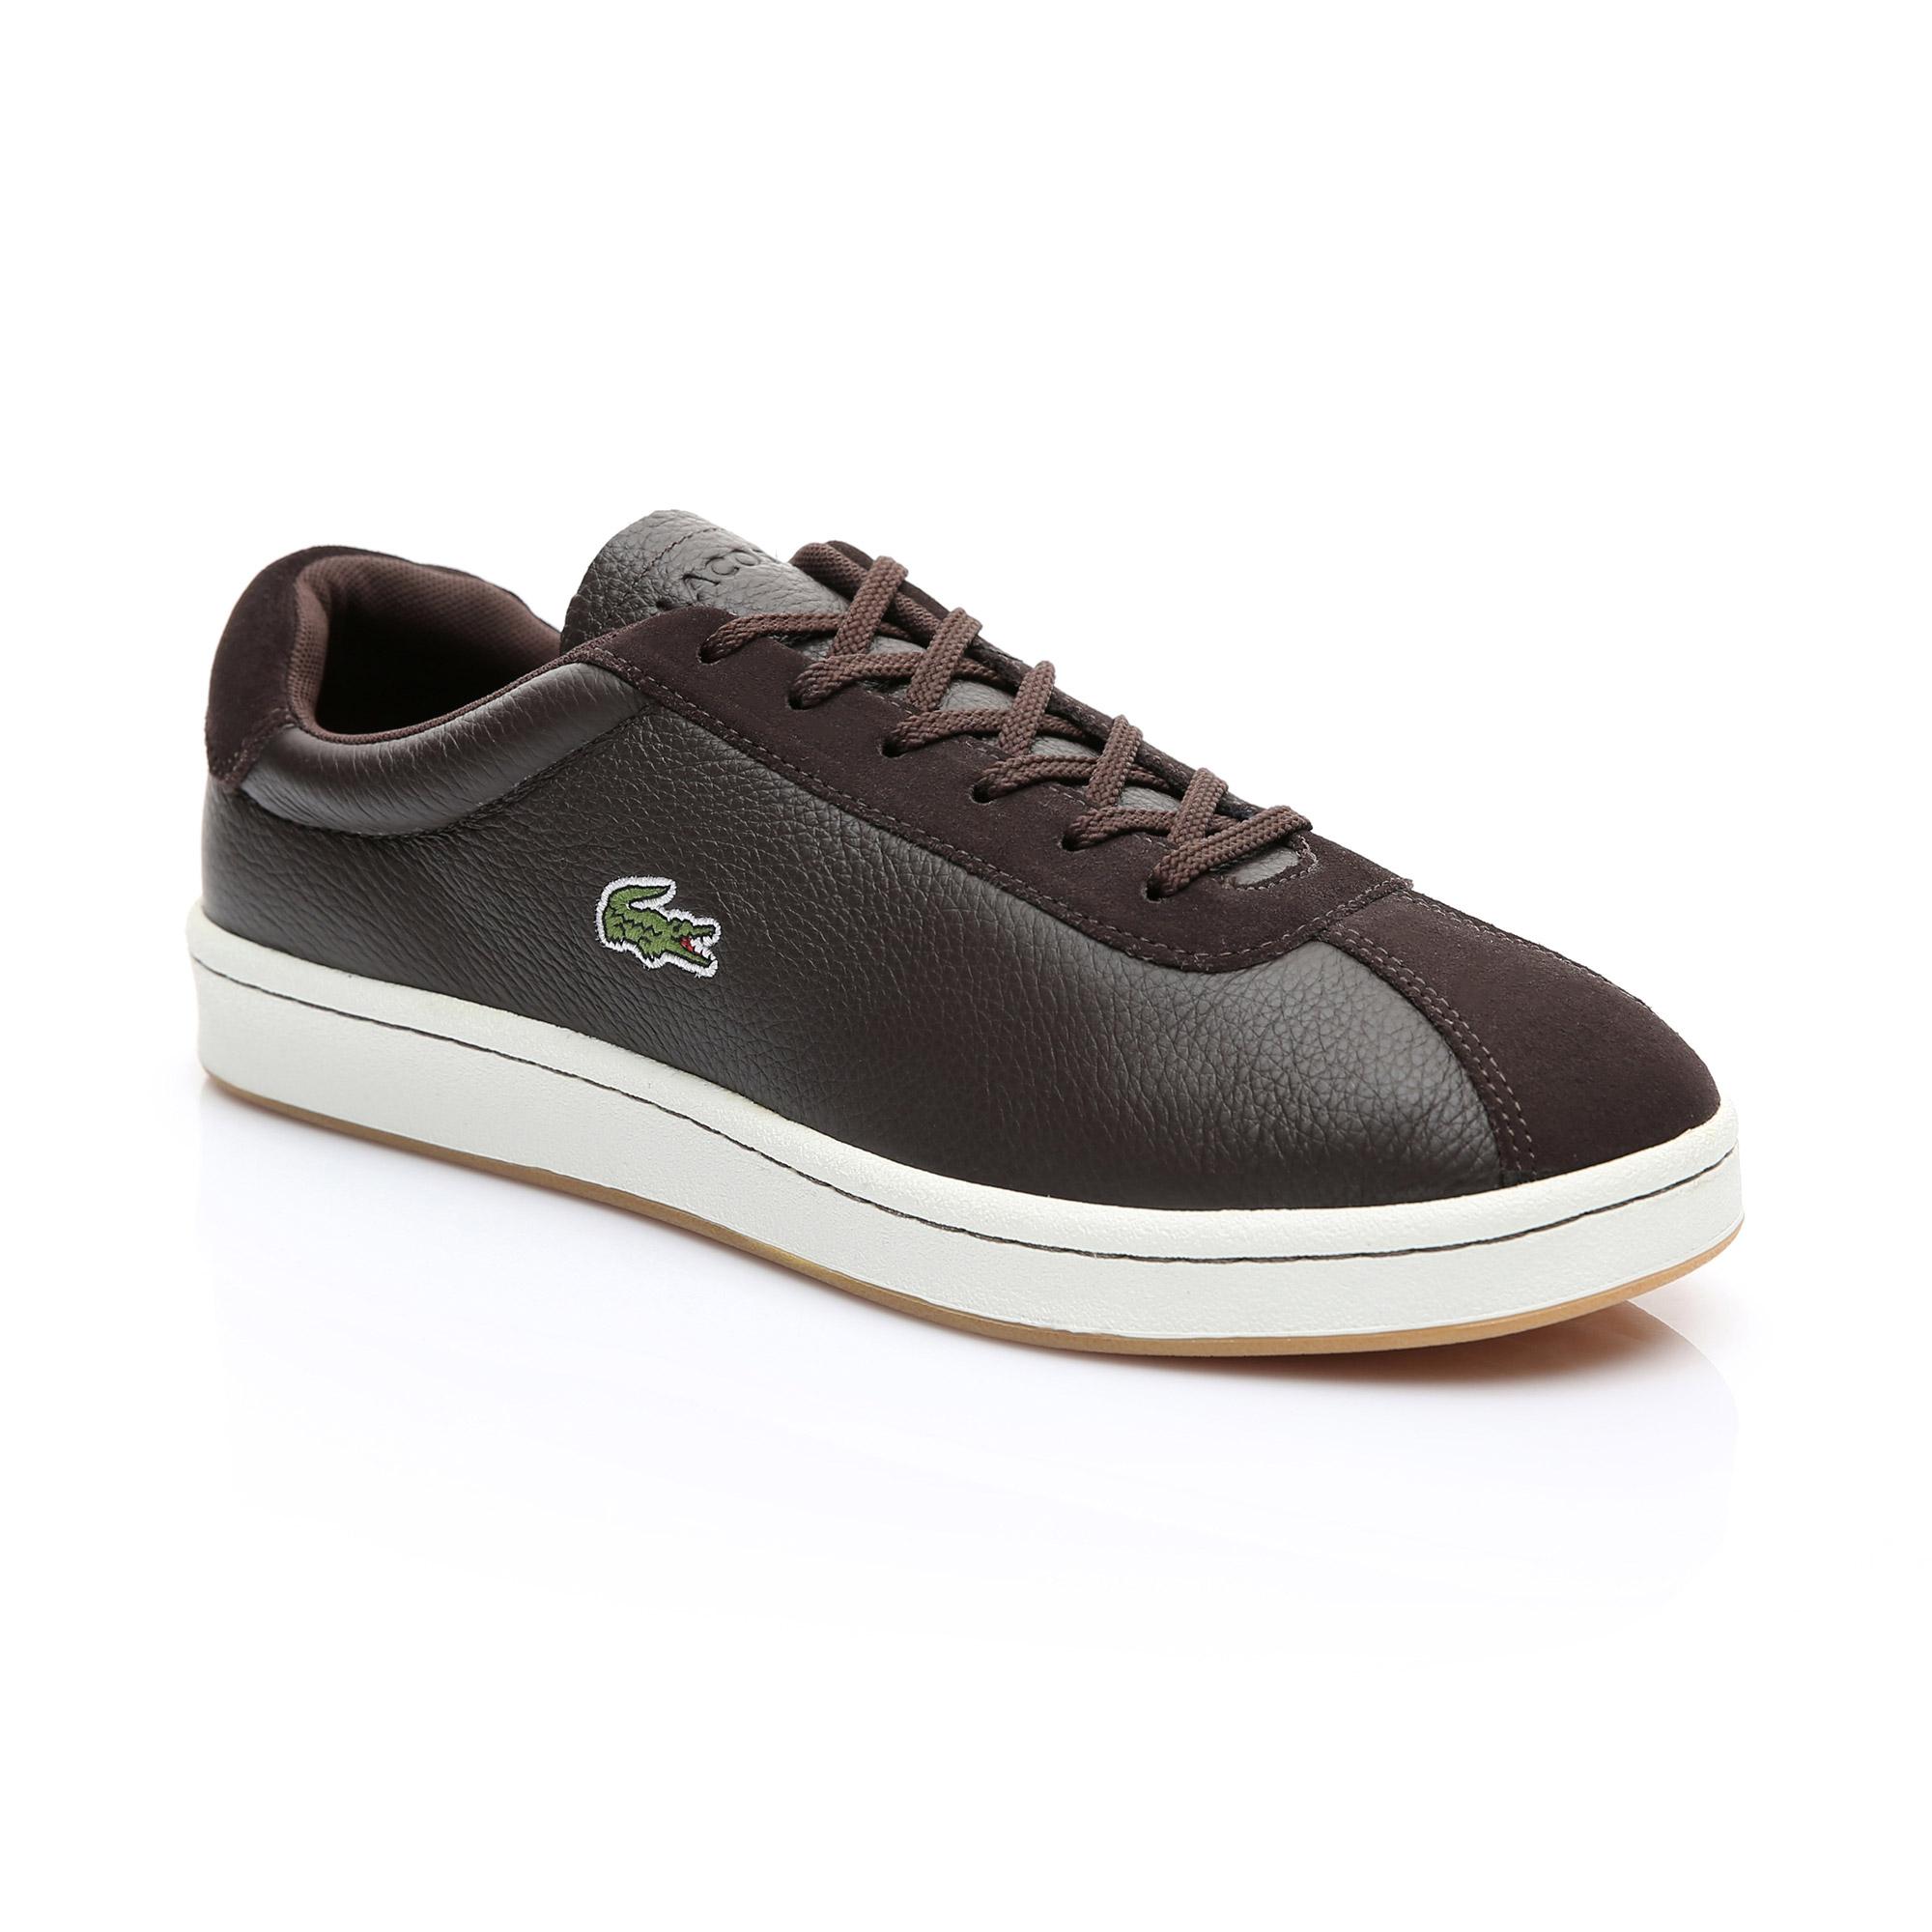 lacoste masters 119